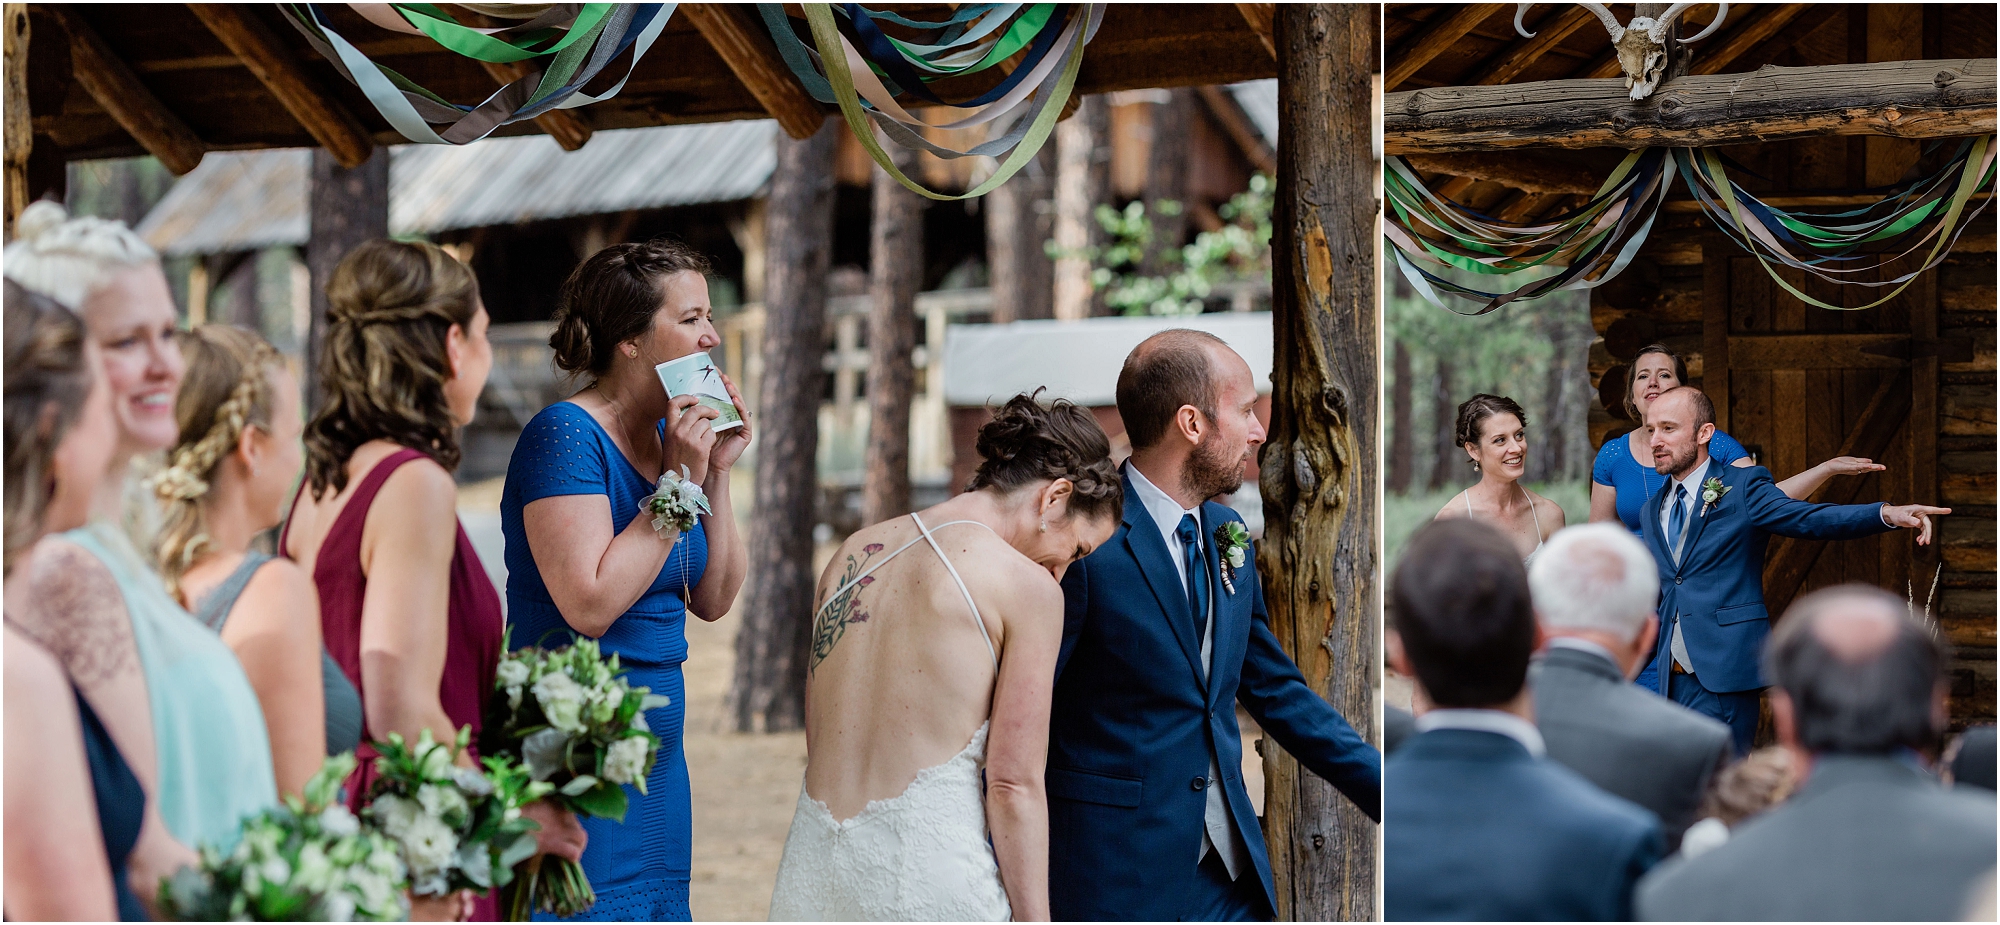 Funny moments with laughter at this outdoor wedding ceremony in beautiful Bend, OR. | Erica Swantek Photography